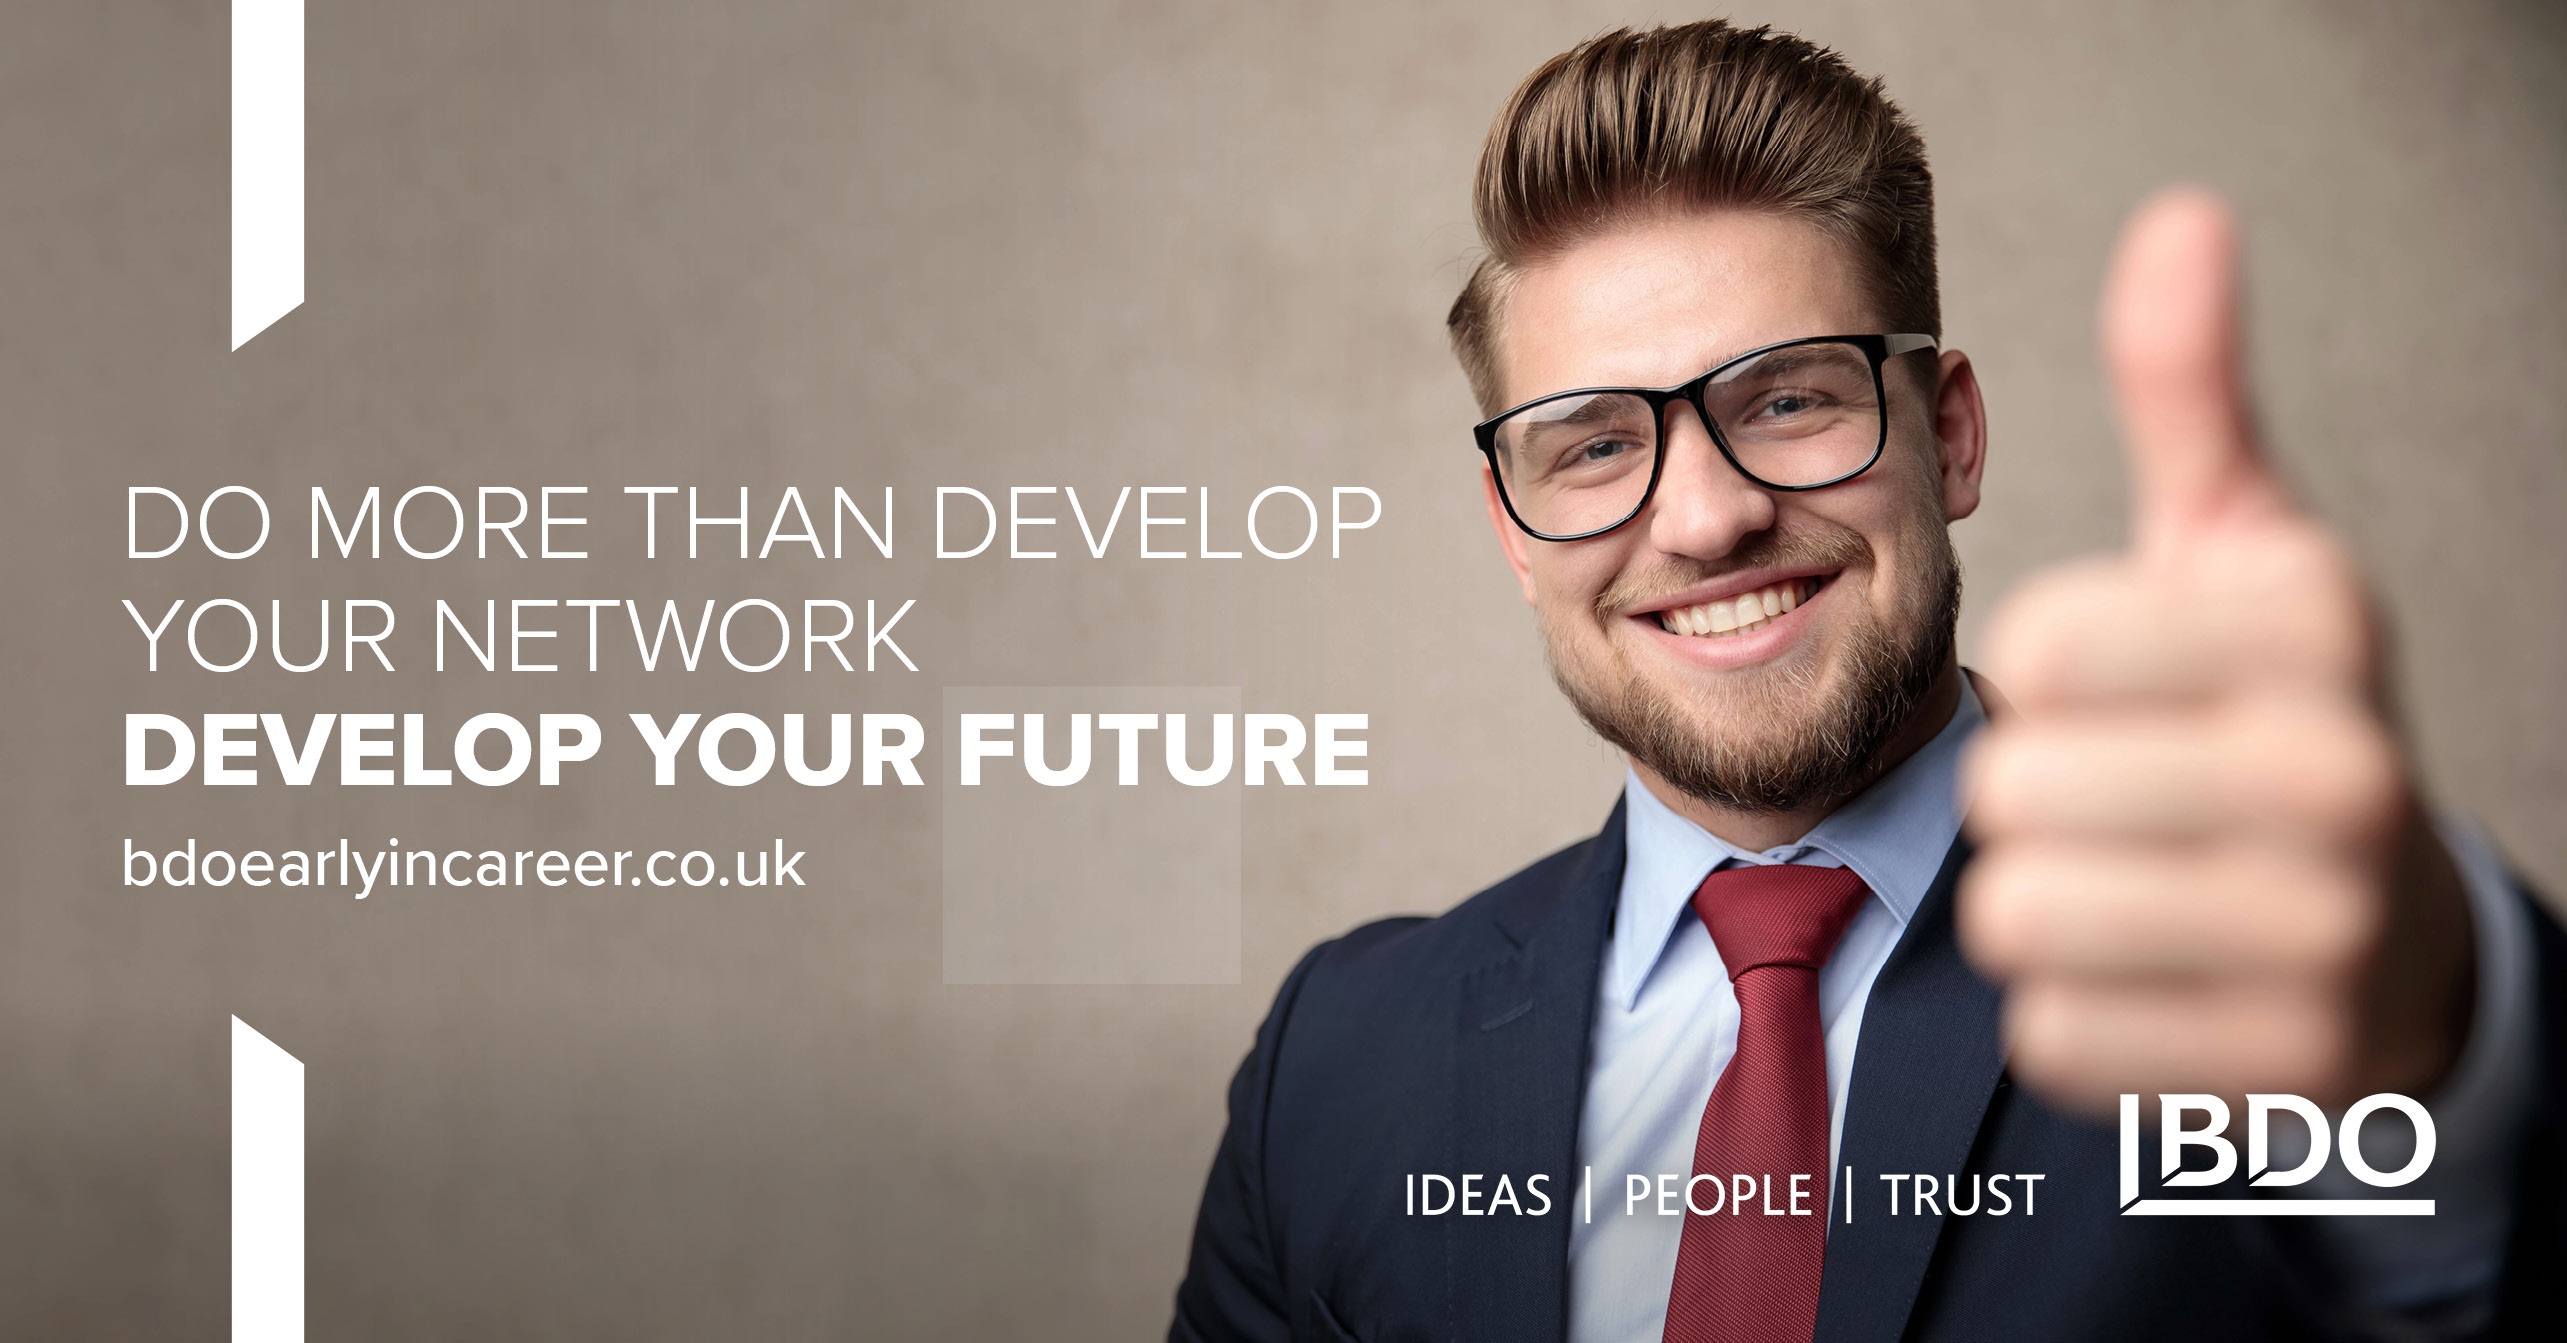 Smartly  dressed man with thumbs up and smiling face. Writing says ' Do more than develop your network. Develop your Future.'